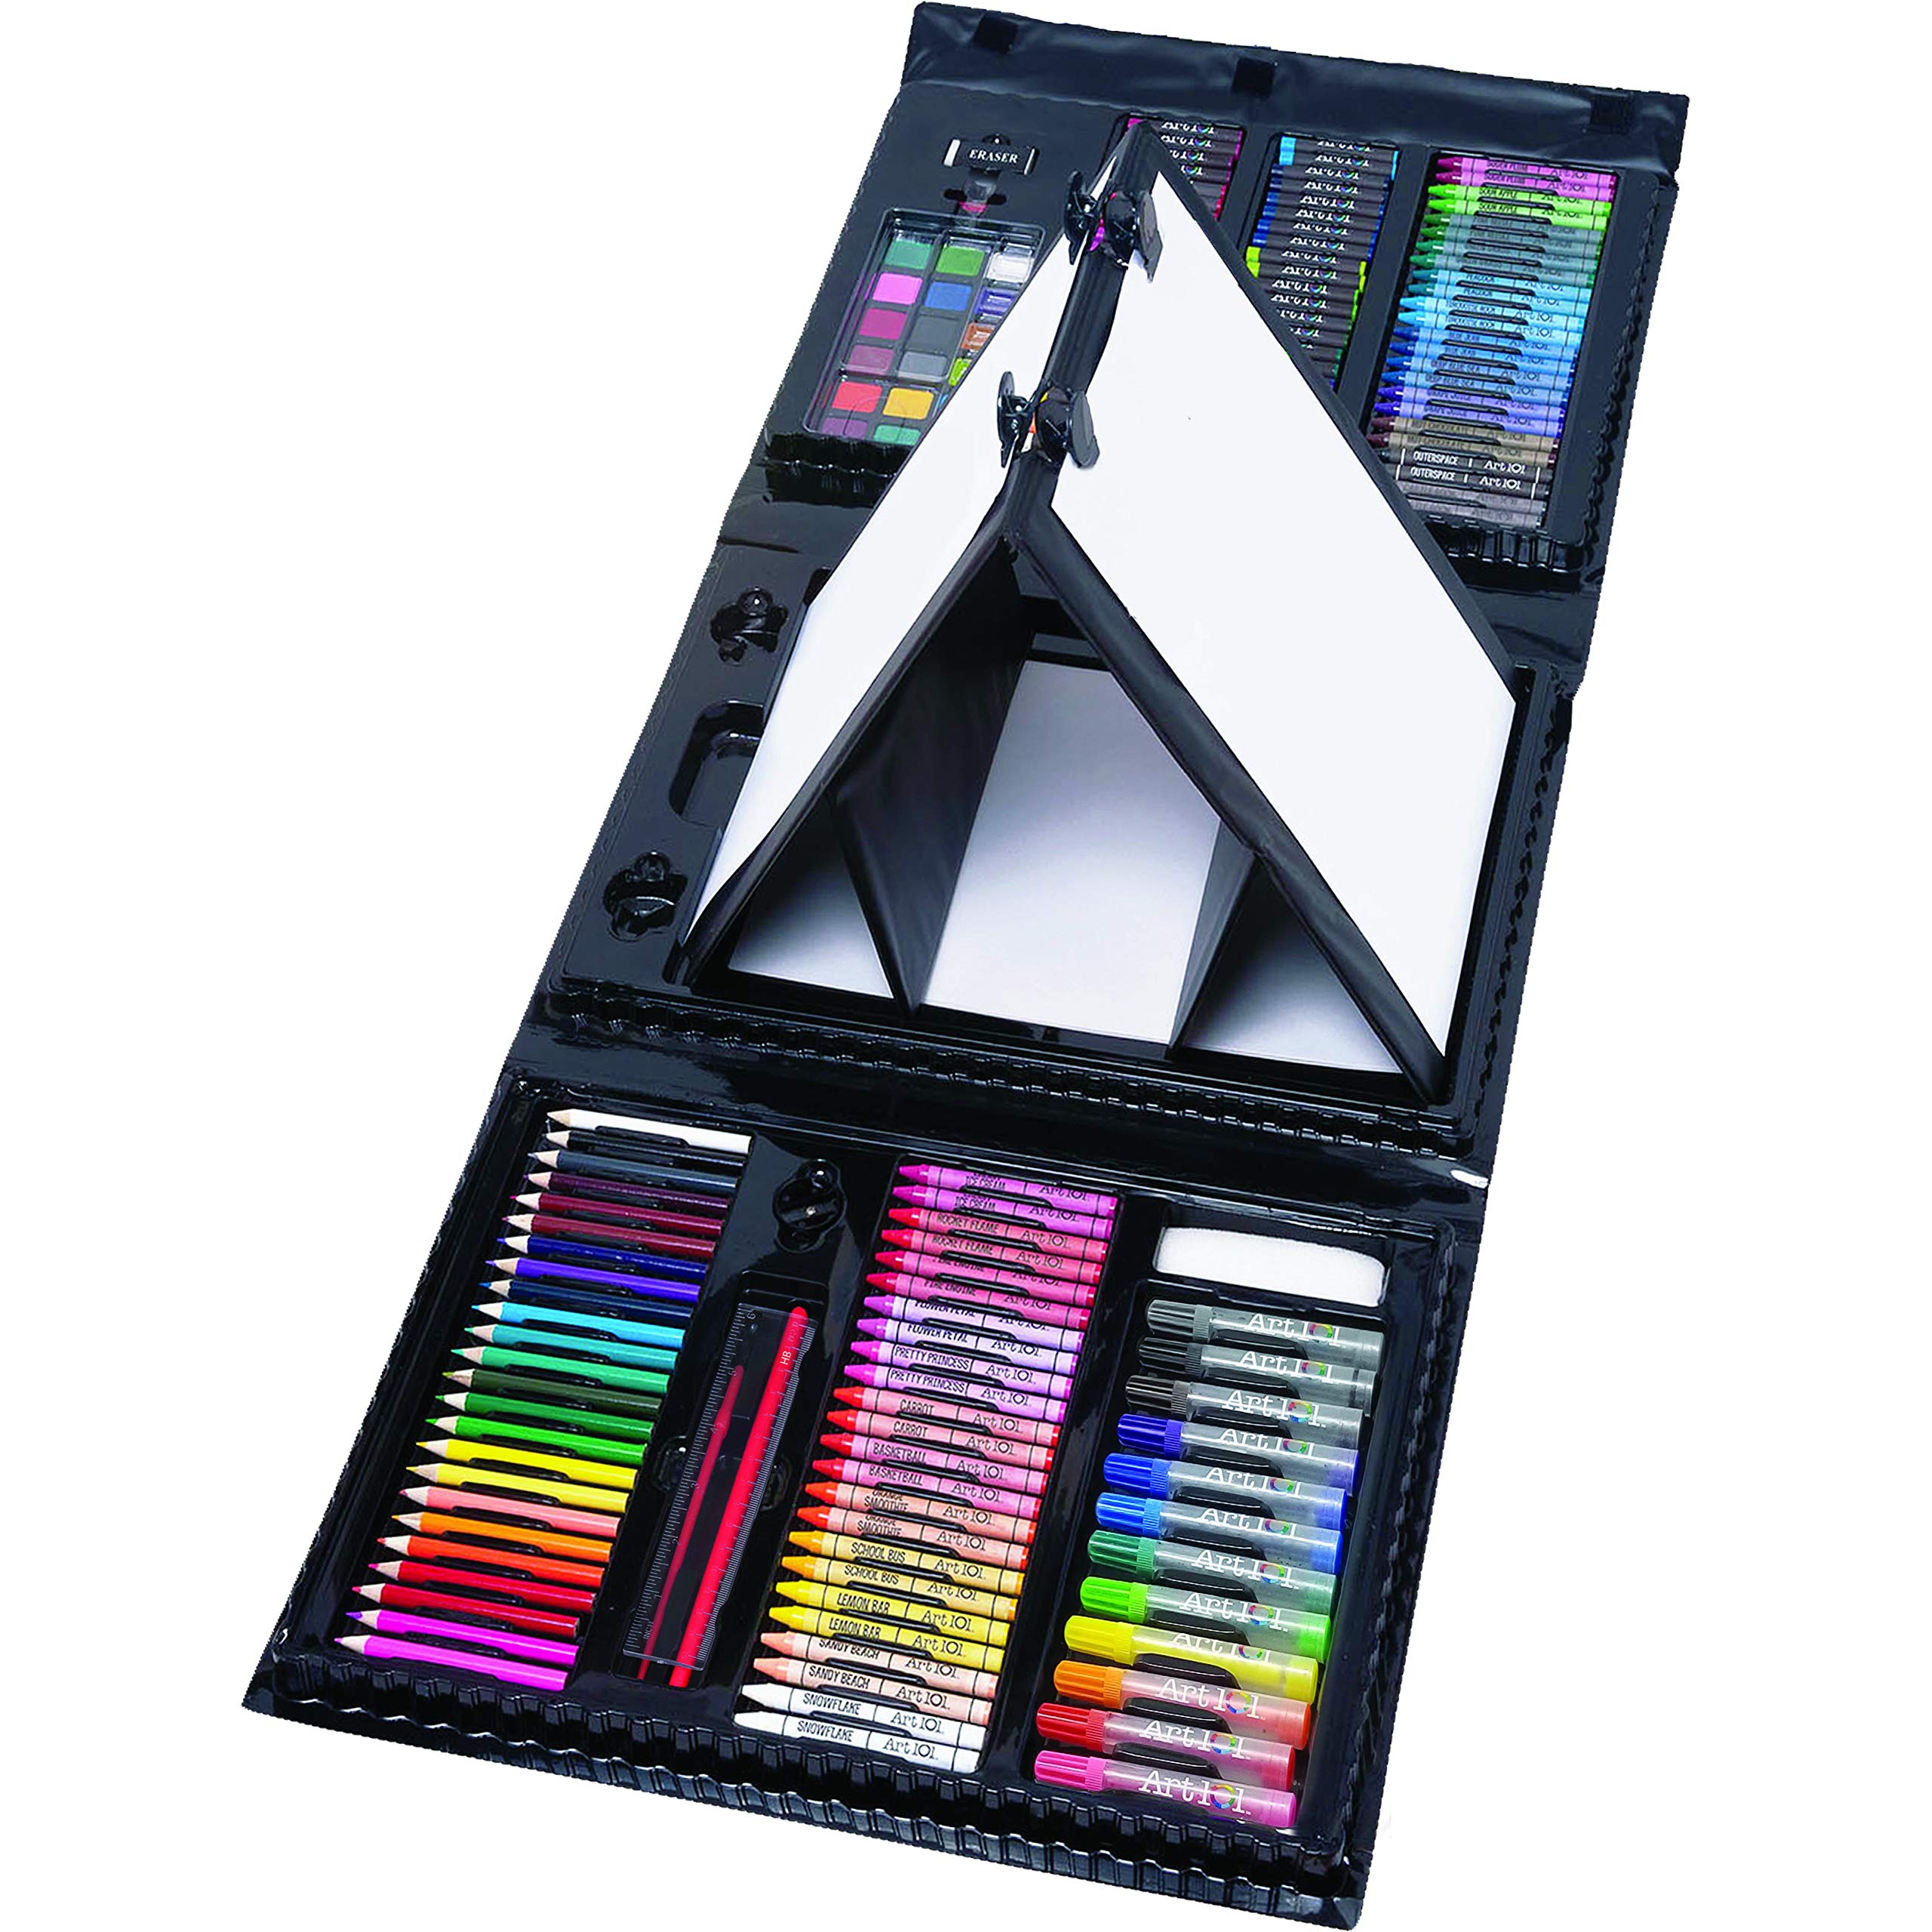 Book Cover Art 101 Budding Artist 179 Piece Draw Paint and Create Art Set with Pop-Up Double-Sided Easel, Includes markers, crayons, paints, colored pencils, Case includes pop up easel, Portable Art Studio